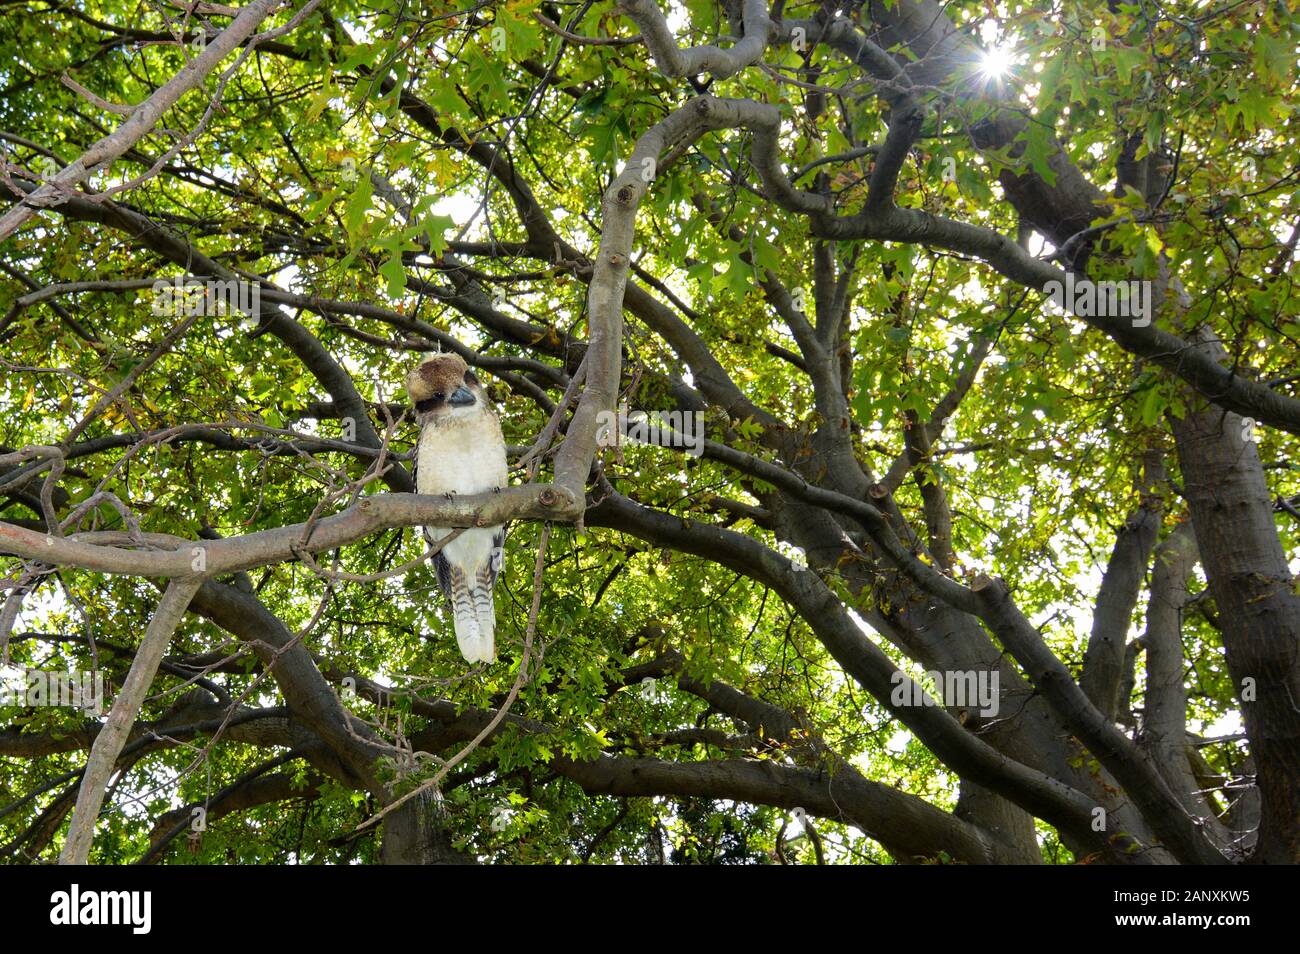 Laughing kookaburra, scientific name Dacelo novaeguineae, perched in a tree to watch for prey Stock Photo